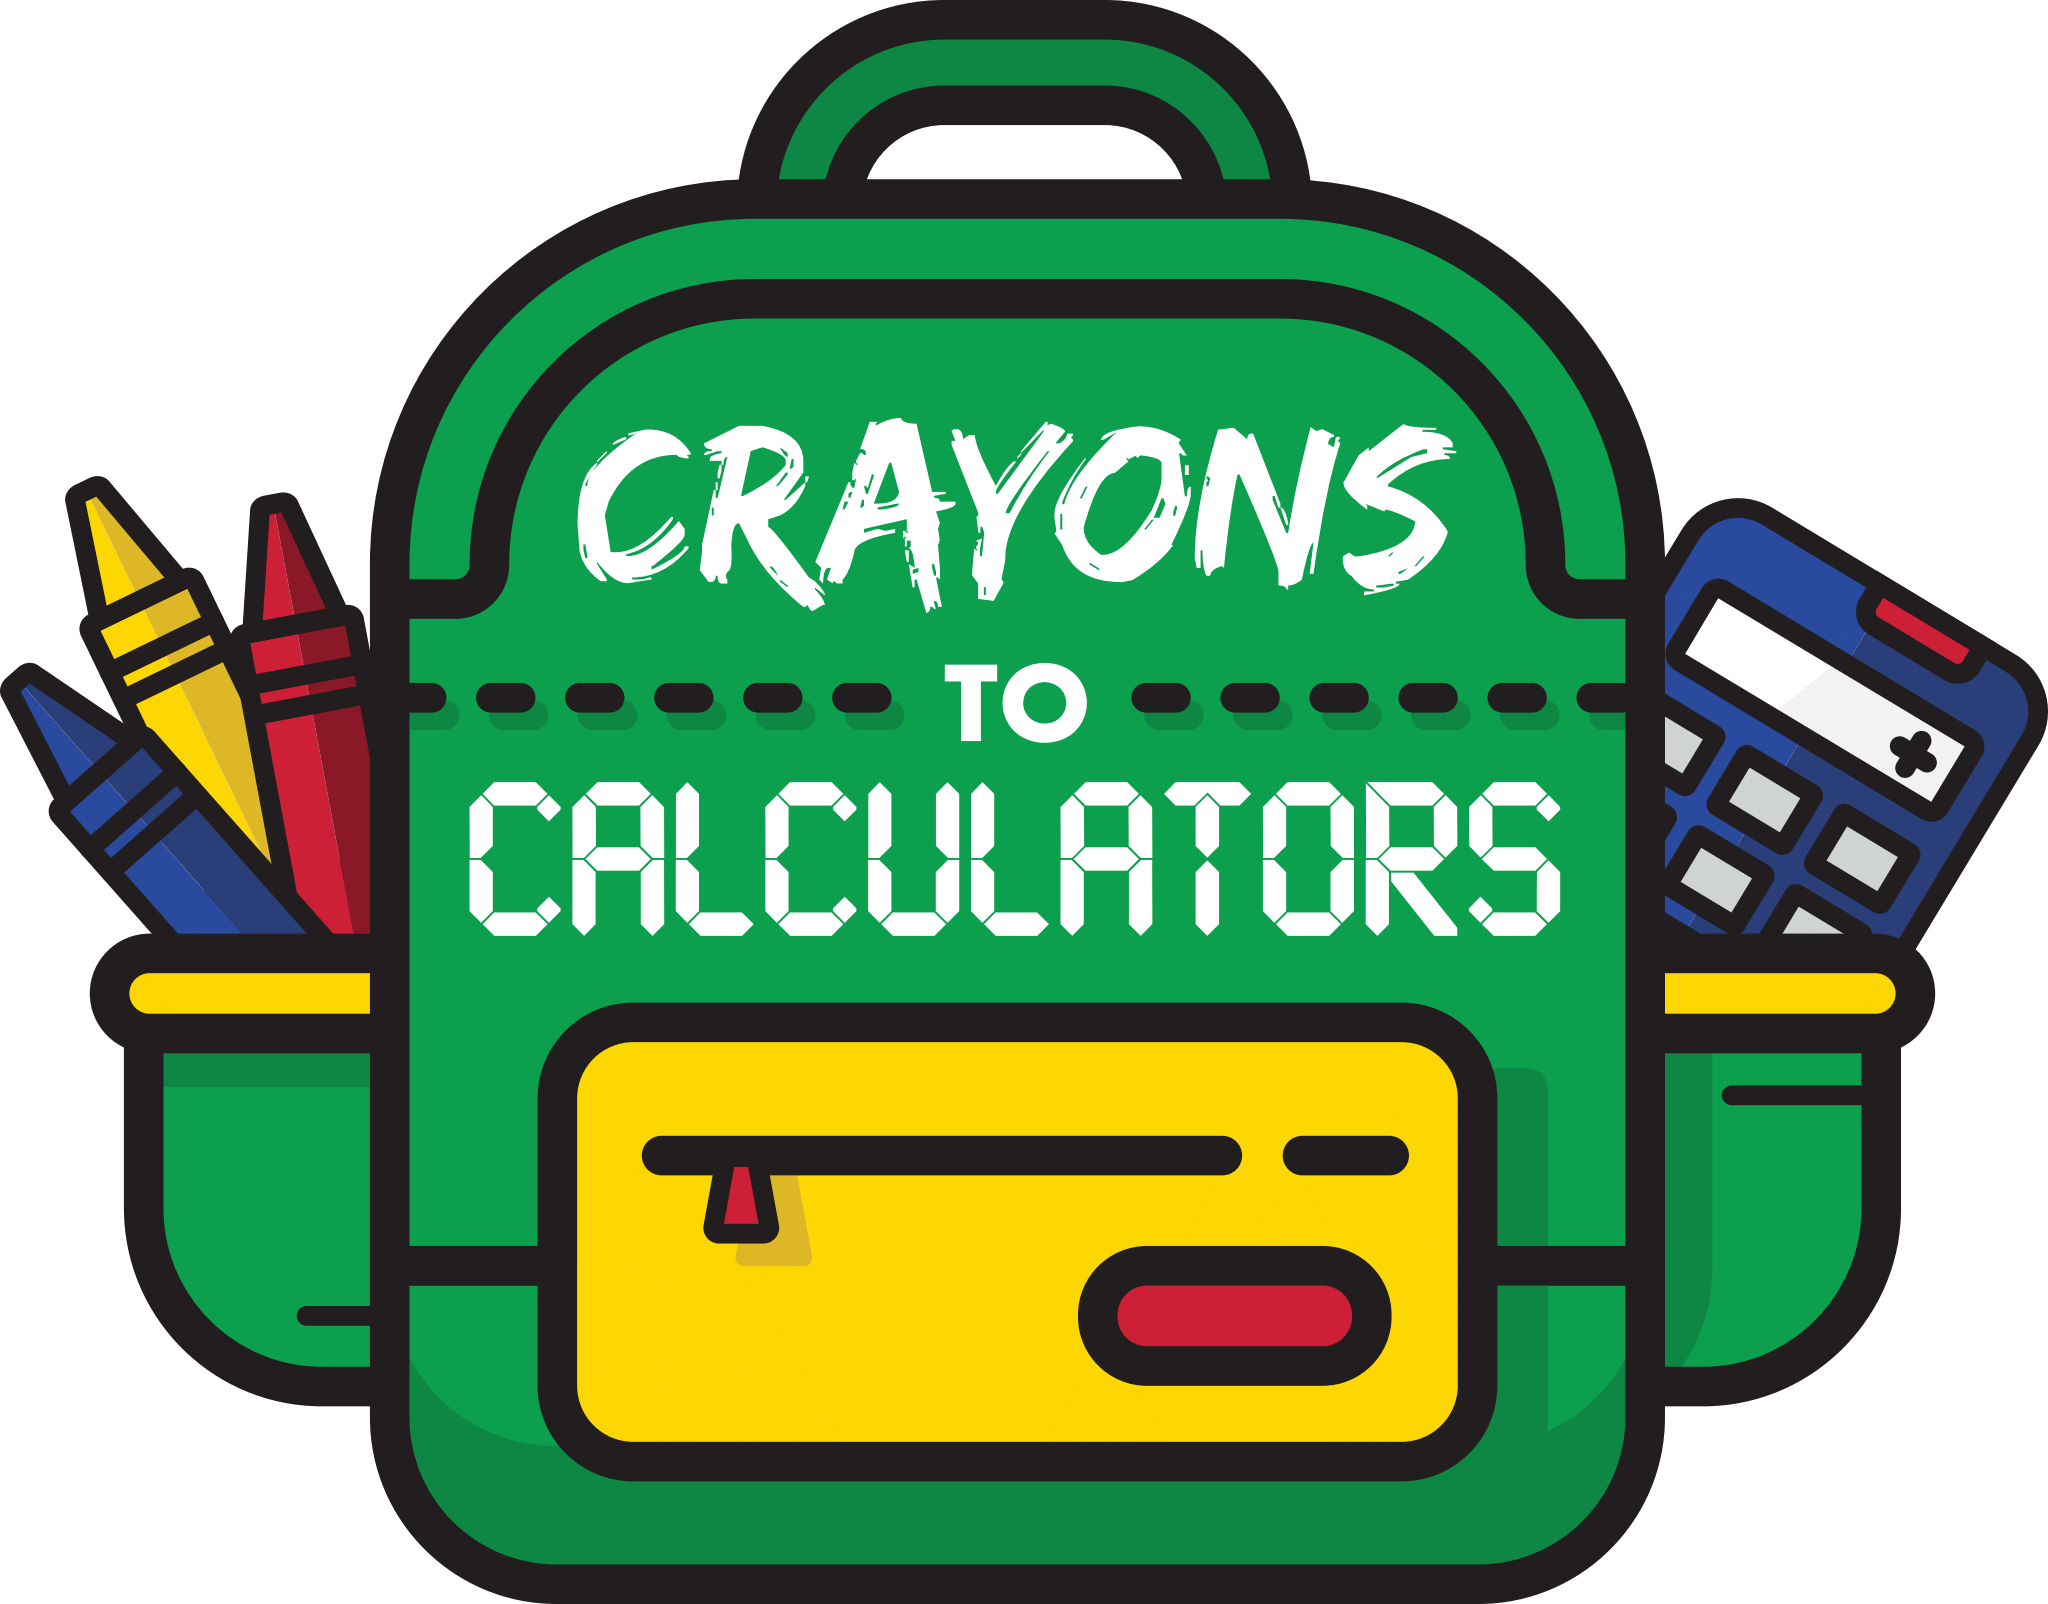 Crayons to Calculators logo with image of green backpack and school supplies